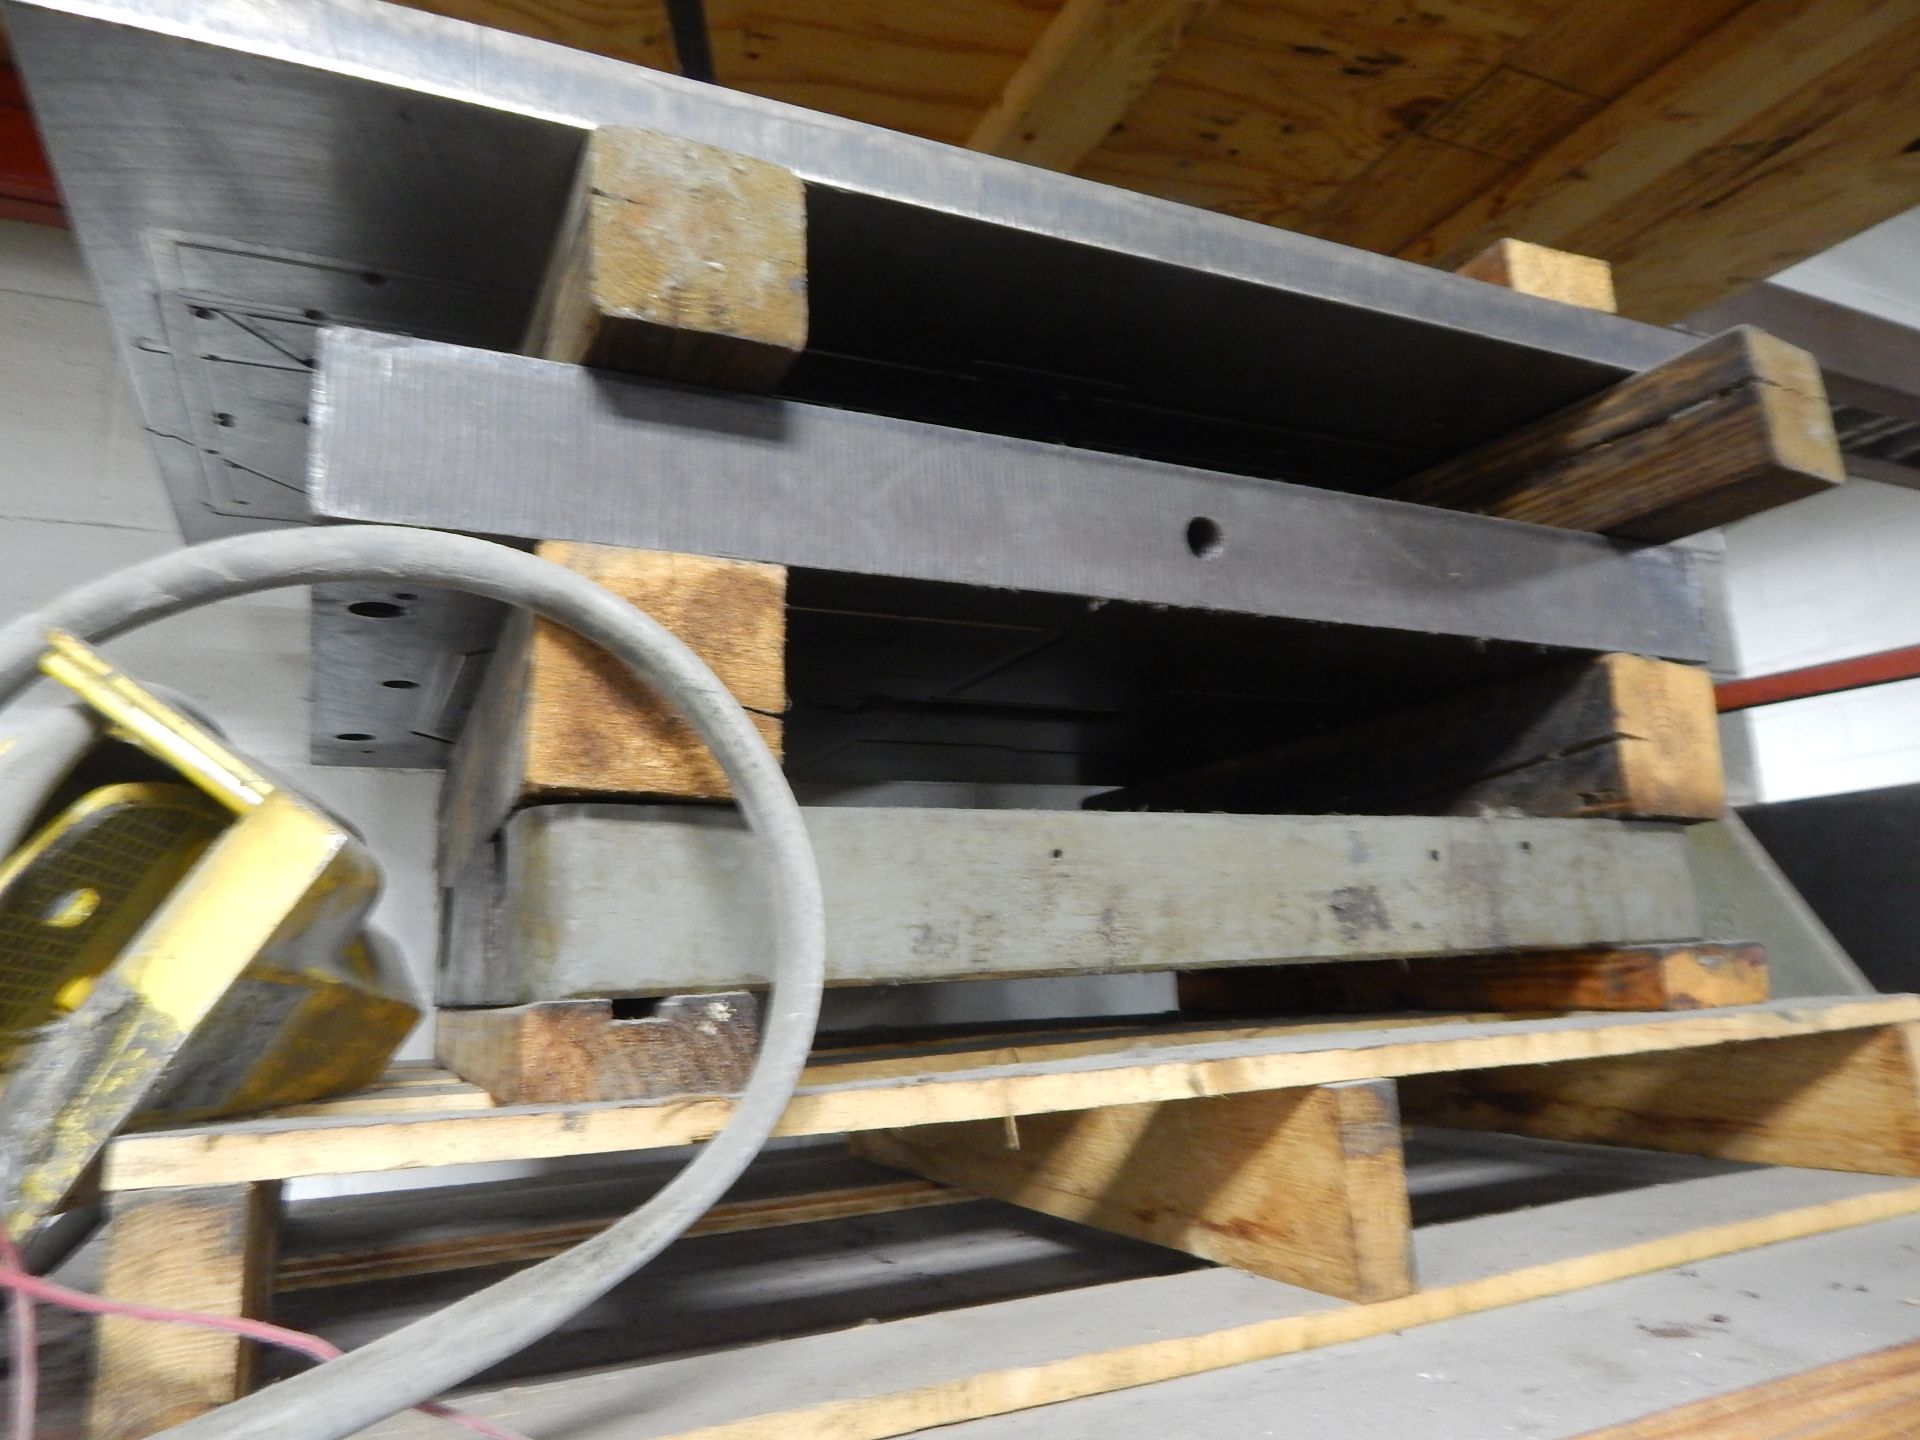 Pallet Shelving and Contents - Image 6 of 9